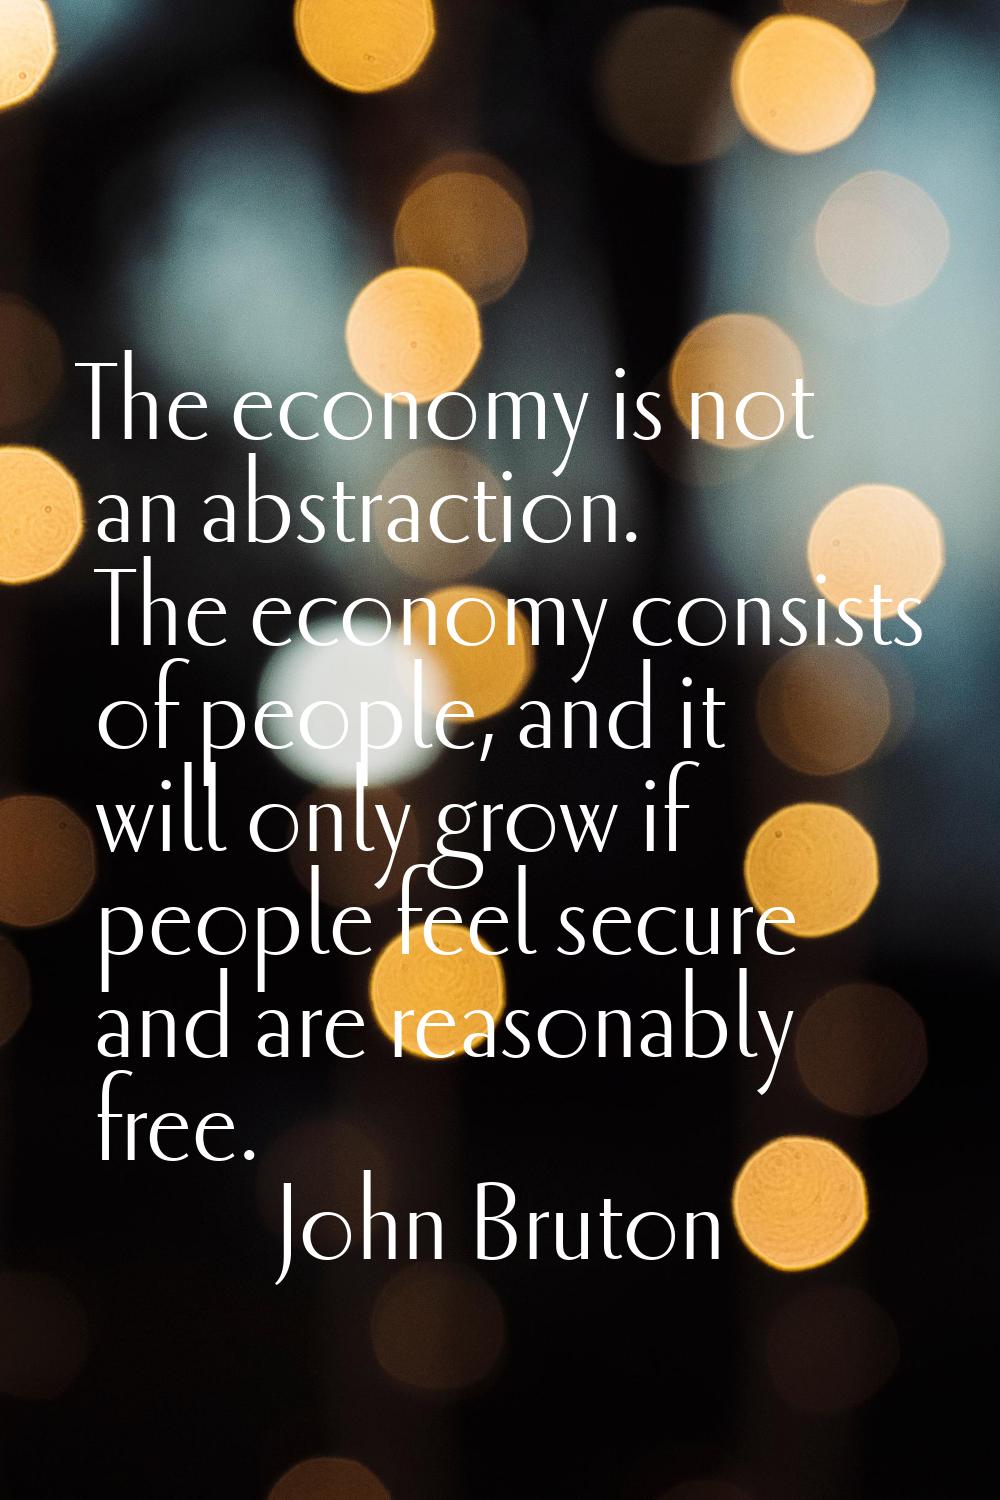 The economy is not an abstraction. The economy consists of people, and it will only grow if people 